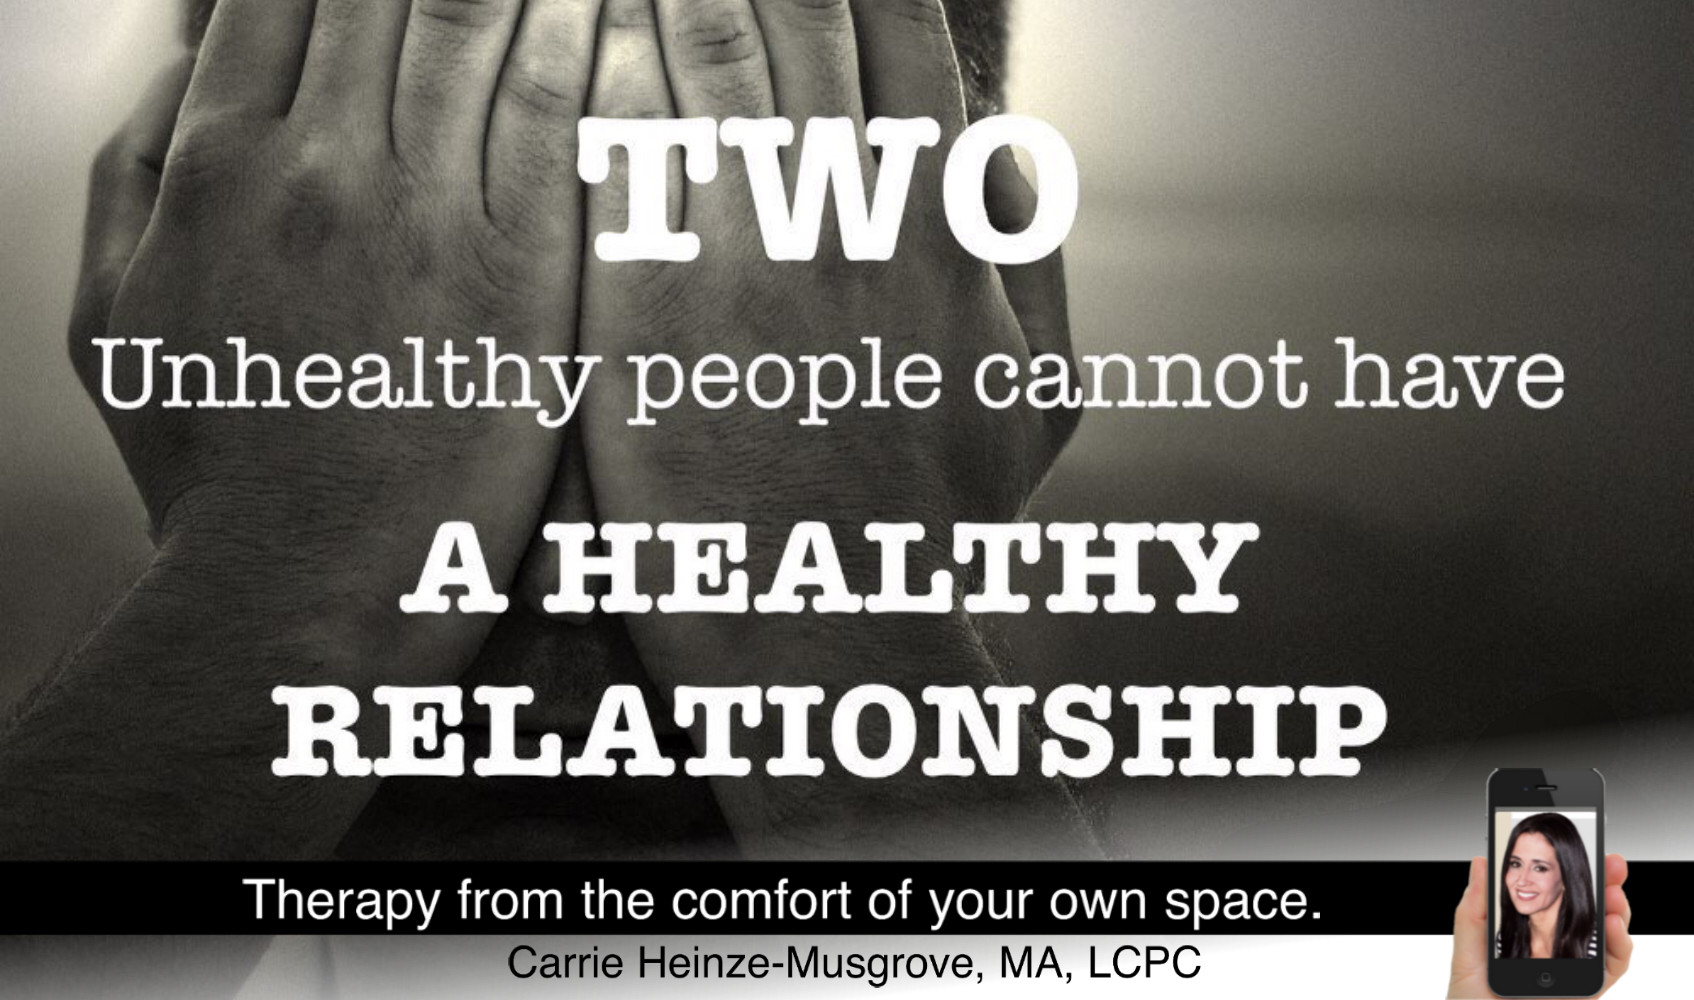 Are you in a unhealthy relationship?